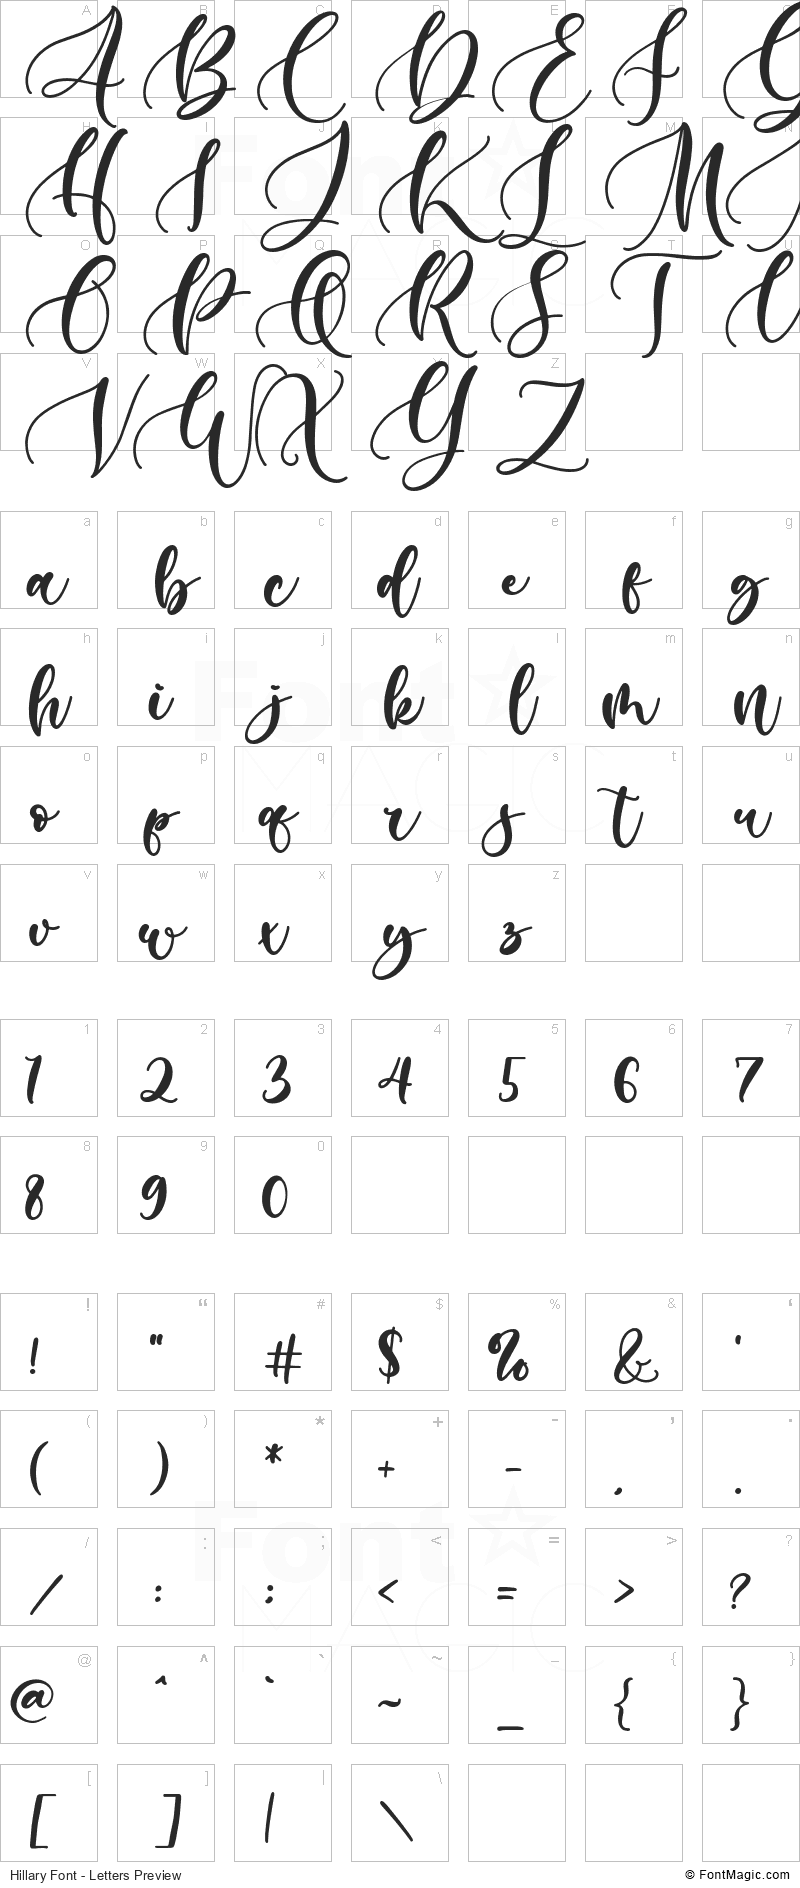 Hillary Font - All Latters Preview Chart